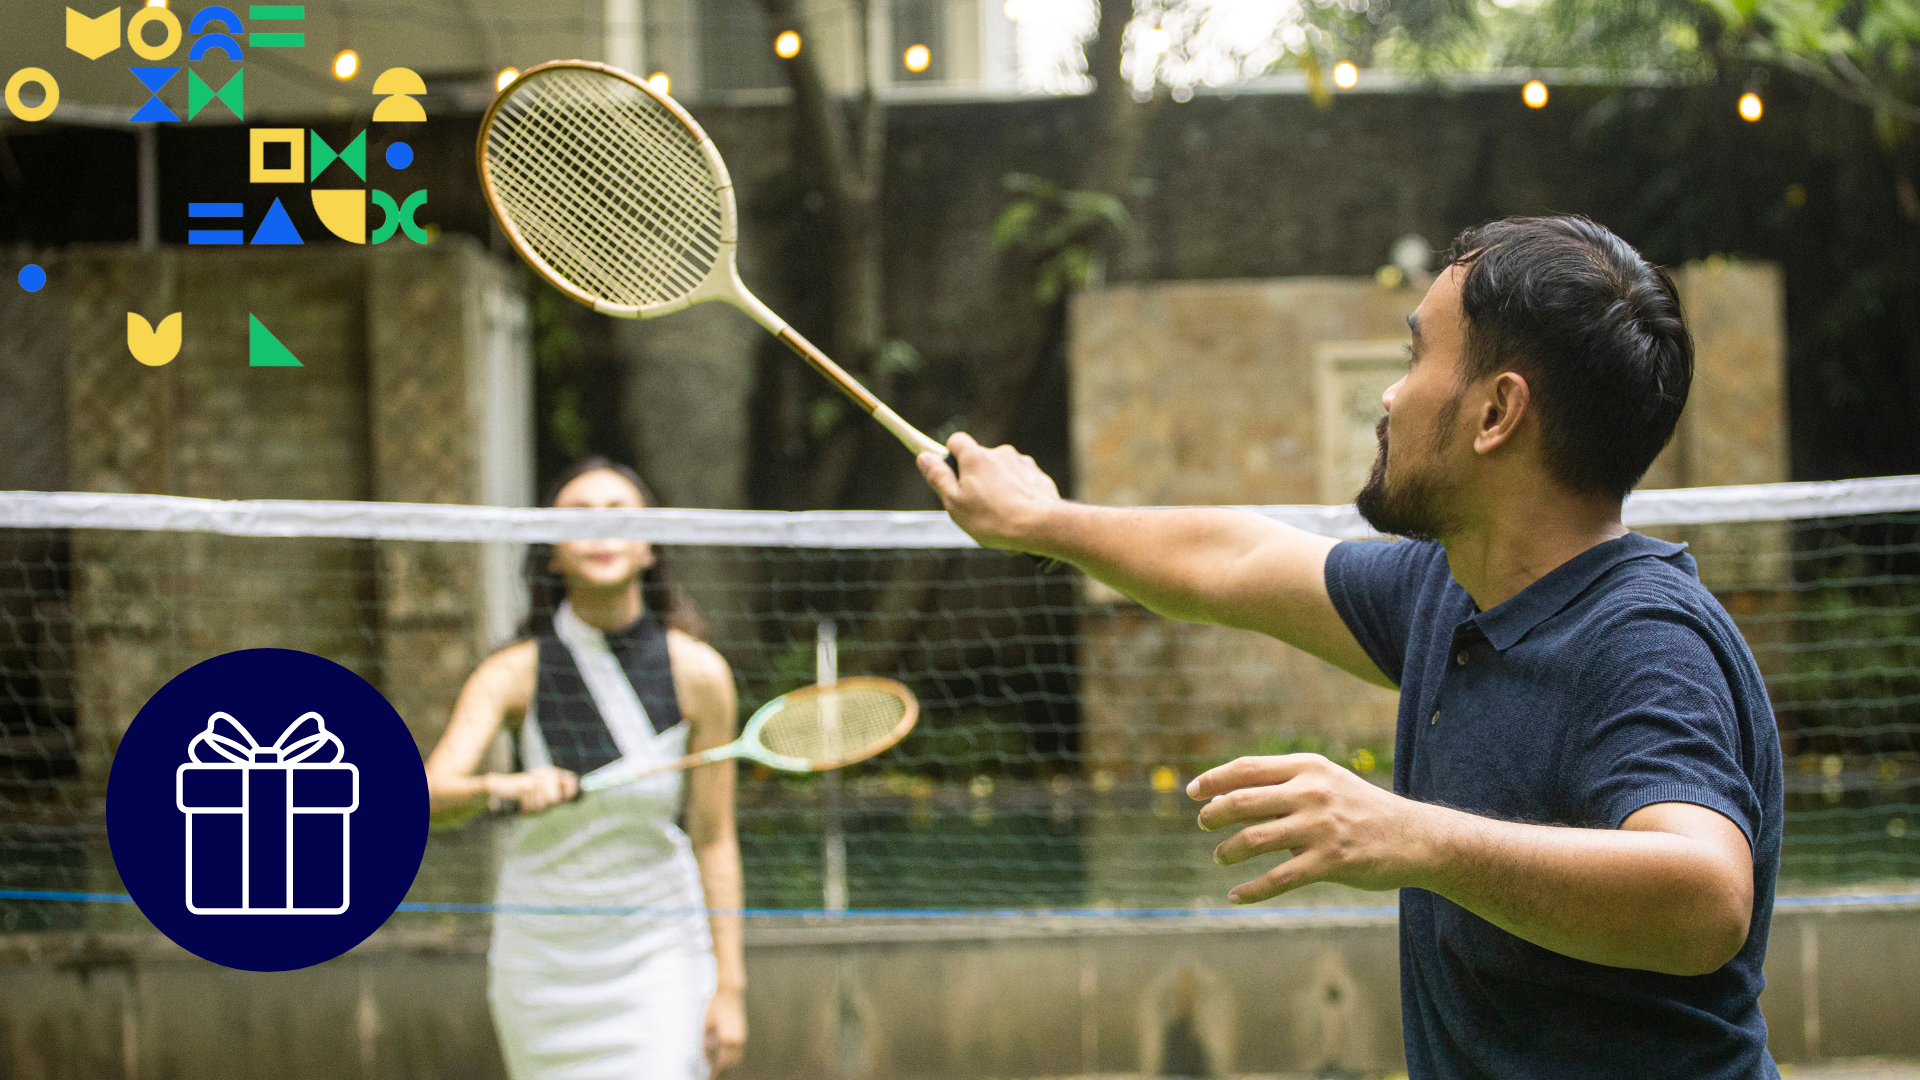 Image of a couple playing badminton to represent a Father's day gift 